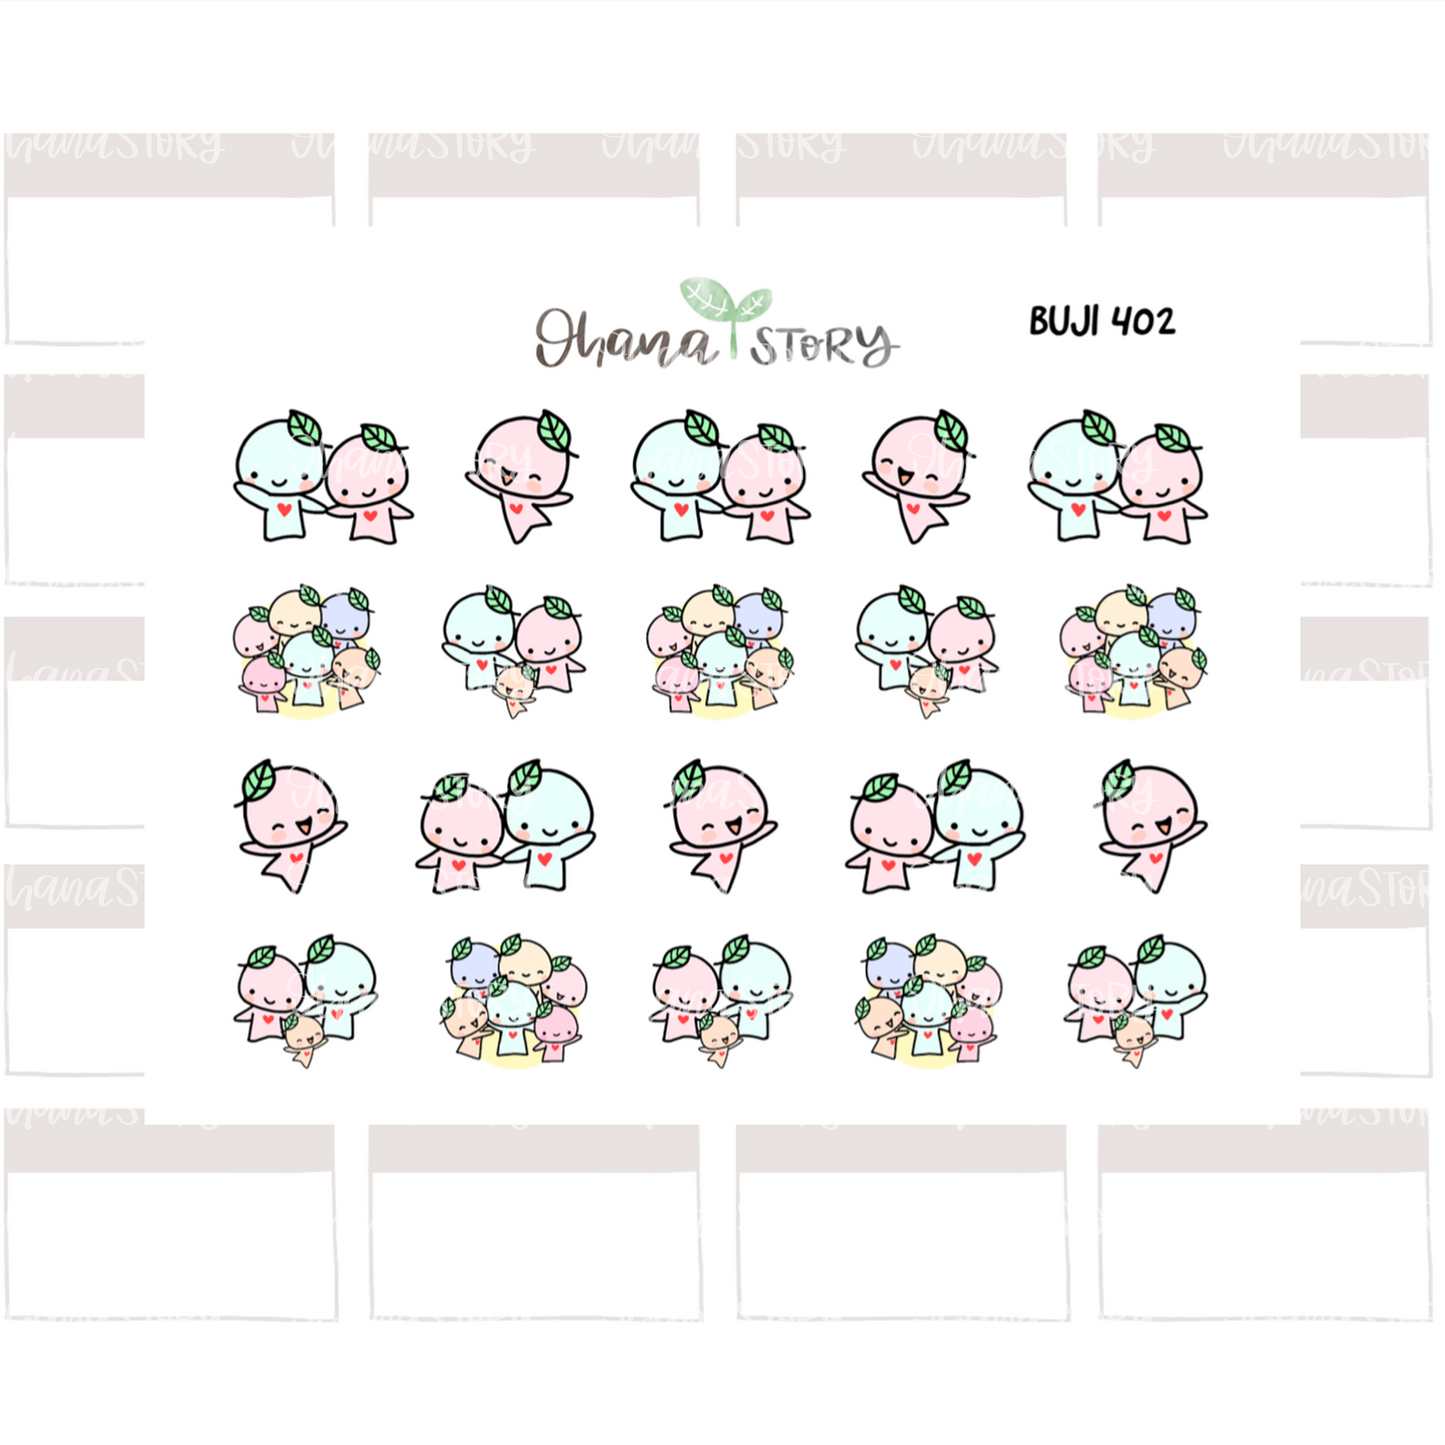 BUJI 402 | Quality Alone / Friends / Family Time | Hand Drawn Planner Stickers